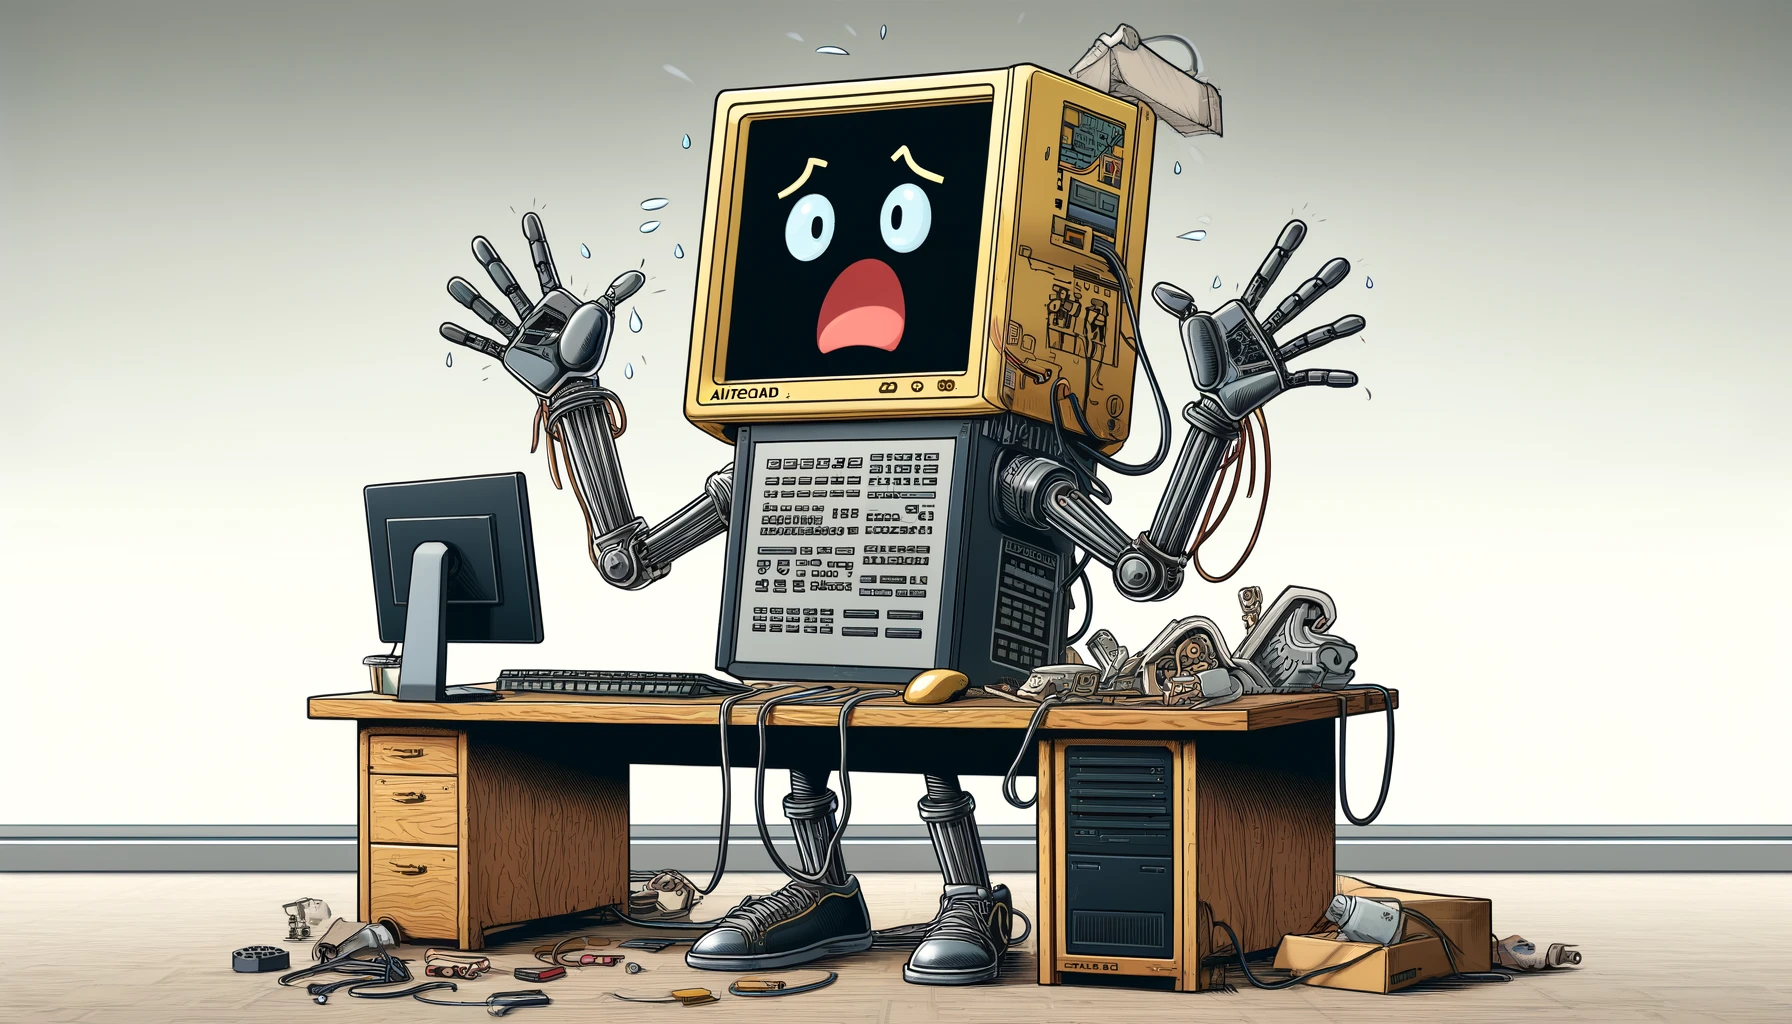 A humorous wide banner image of a robot designed as an inept version of AutoCAD software. The robot has a rectangular body resembling a traditional computer tower, and the head is a monitor displaying a bewildered digital face. Limbs are fashioned from wired peripherals like a keyboard and a mouse. The cartoonish design emphasizes the quirky and inefficient character. This header image features a panoramic office background with scattered cables and old computer parts.